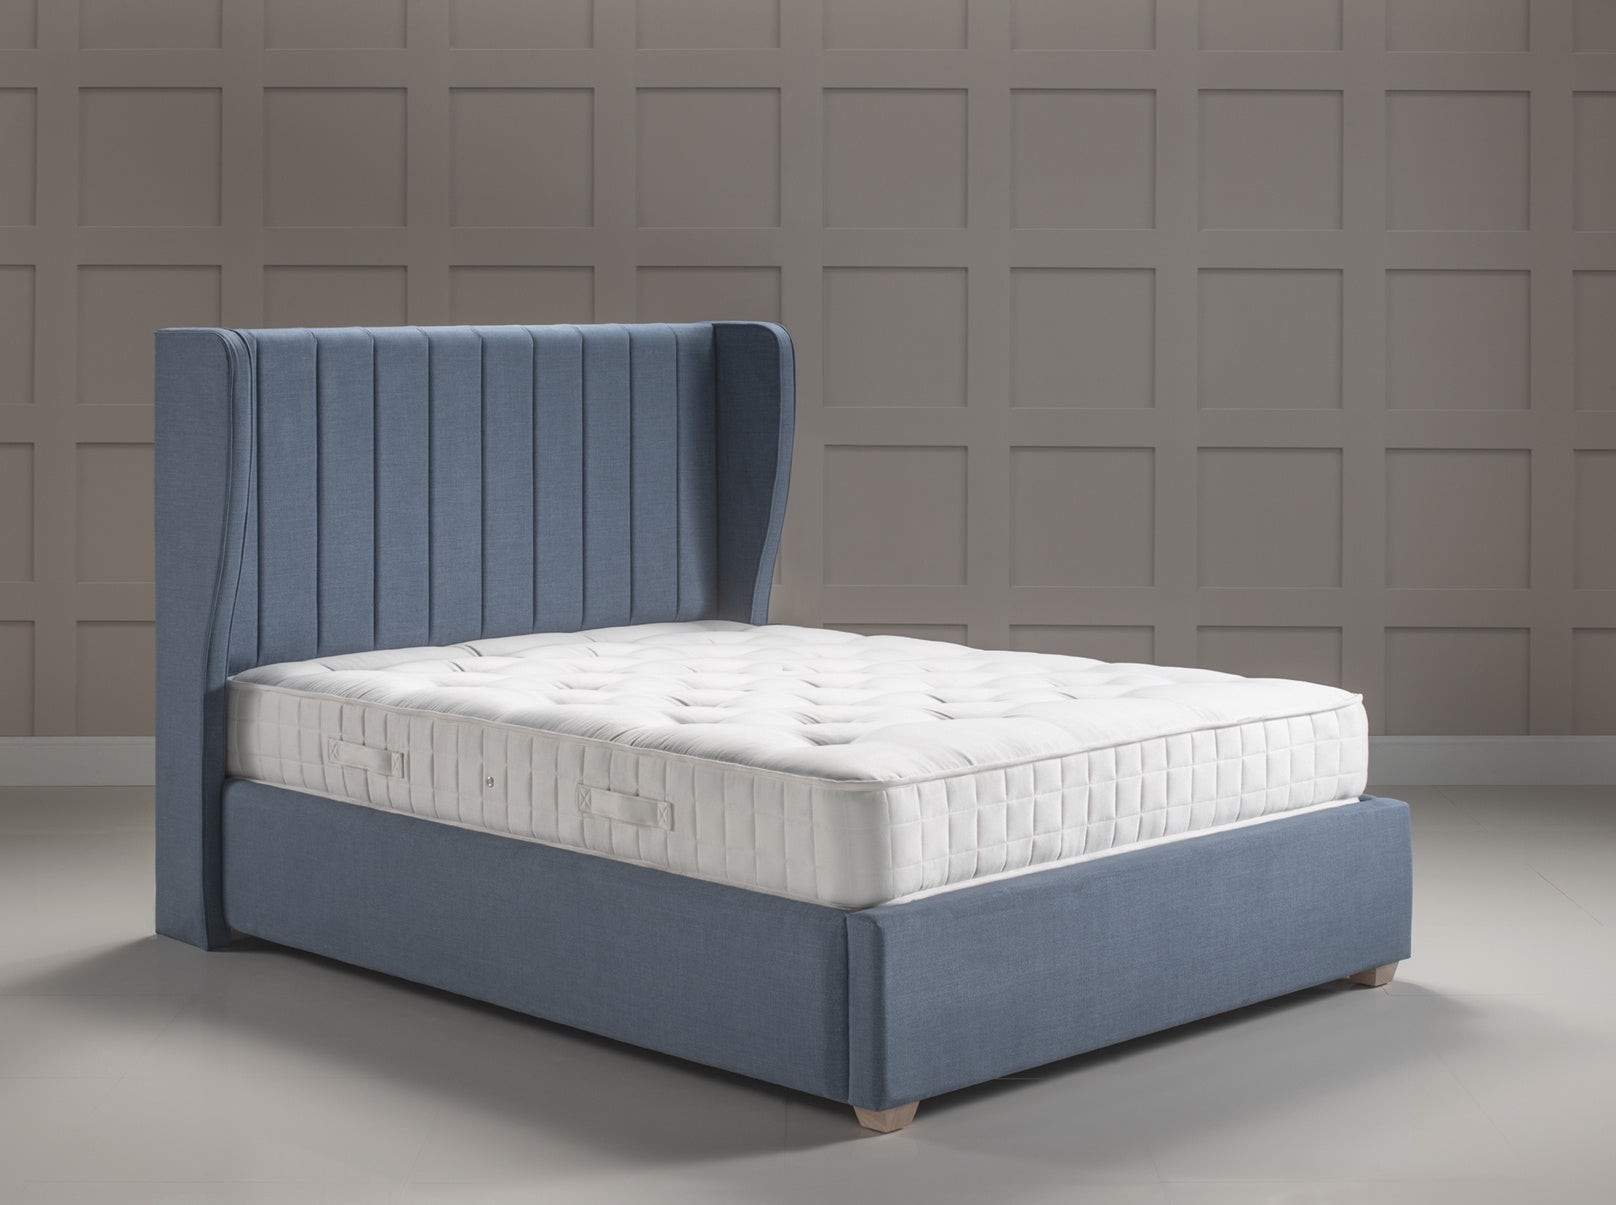 The  Hatfield Upholstered Bed